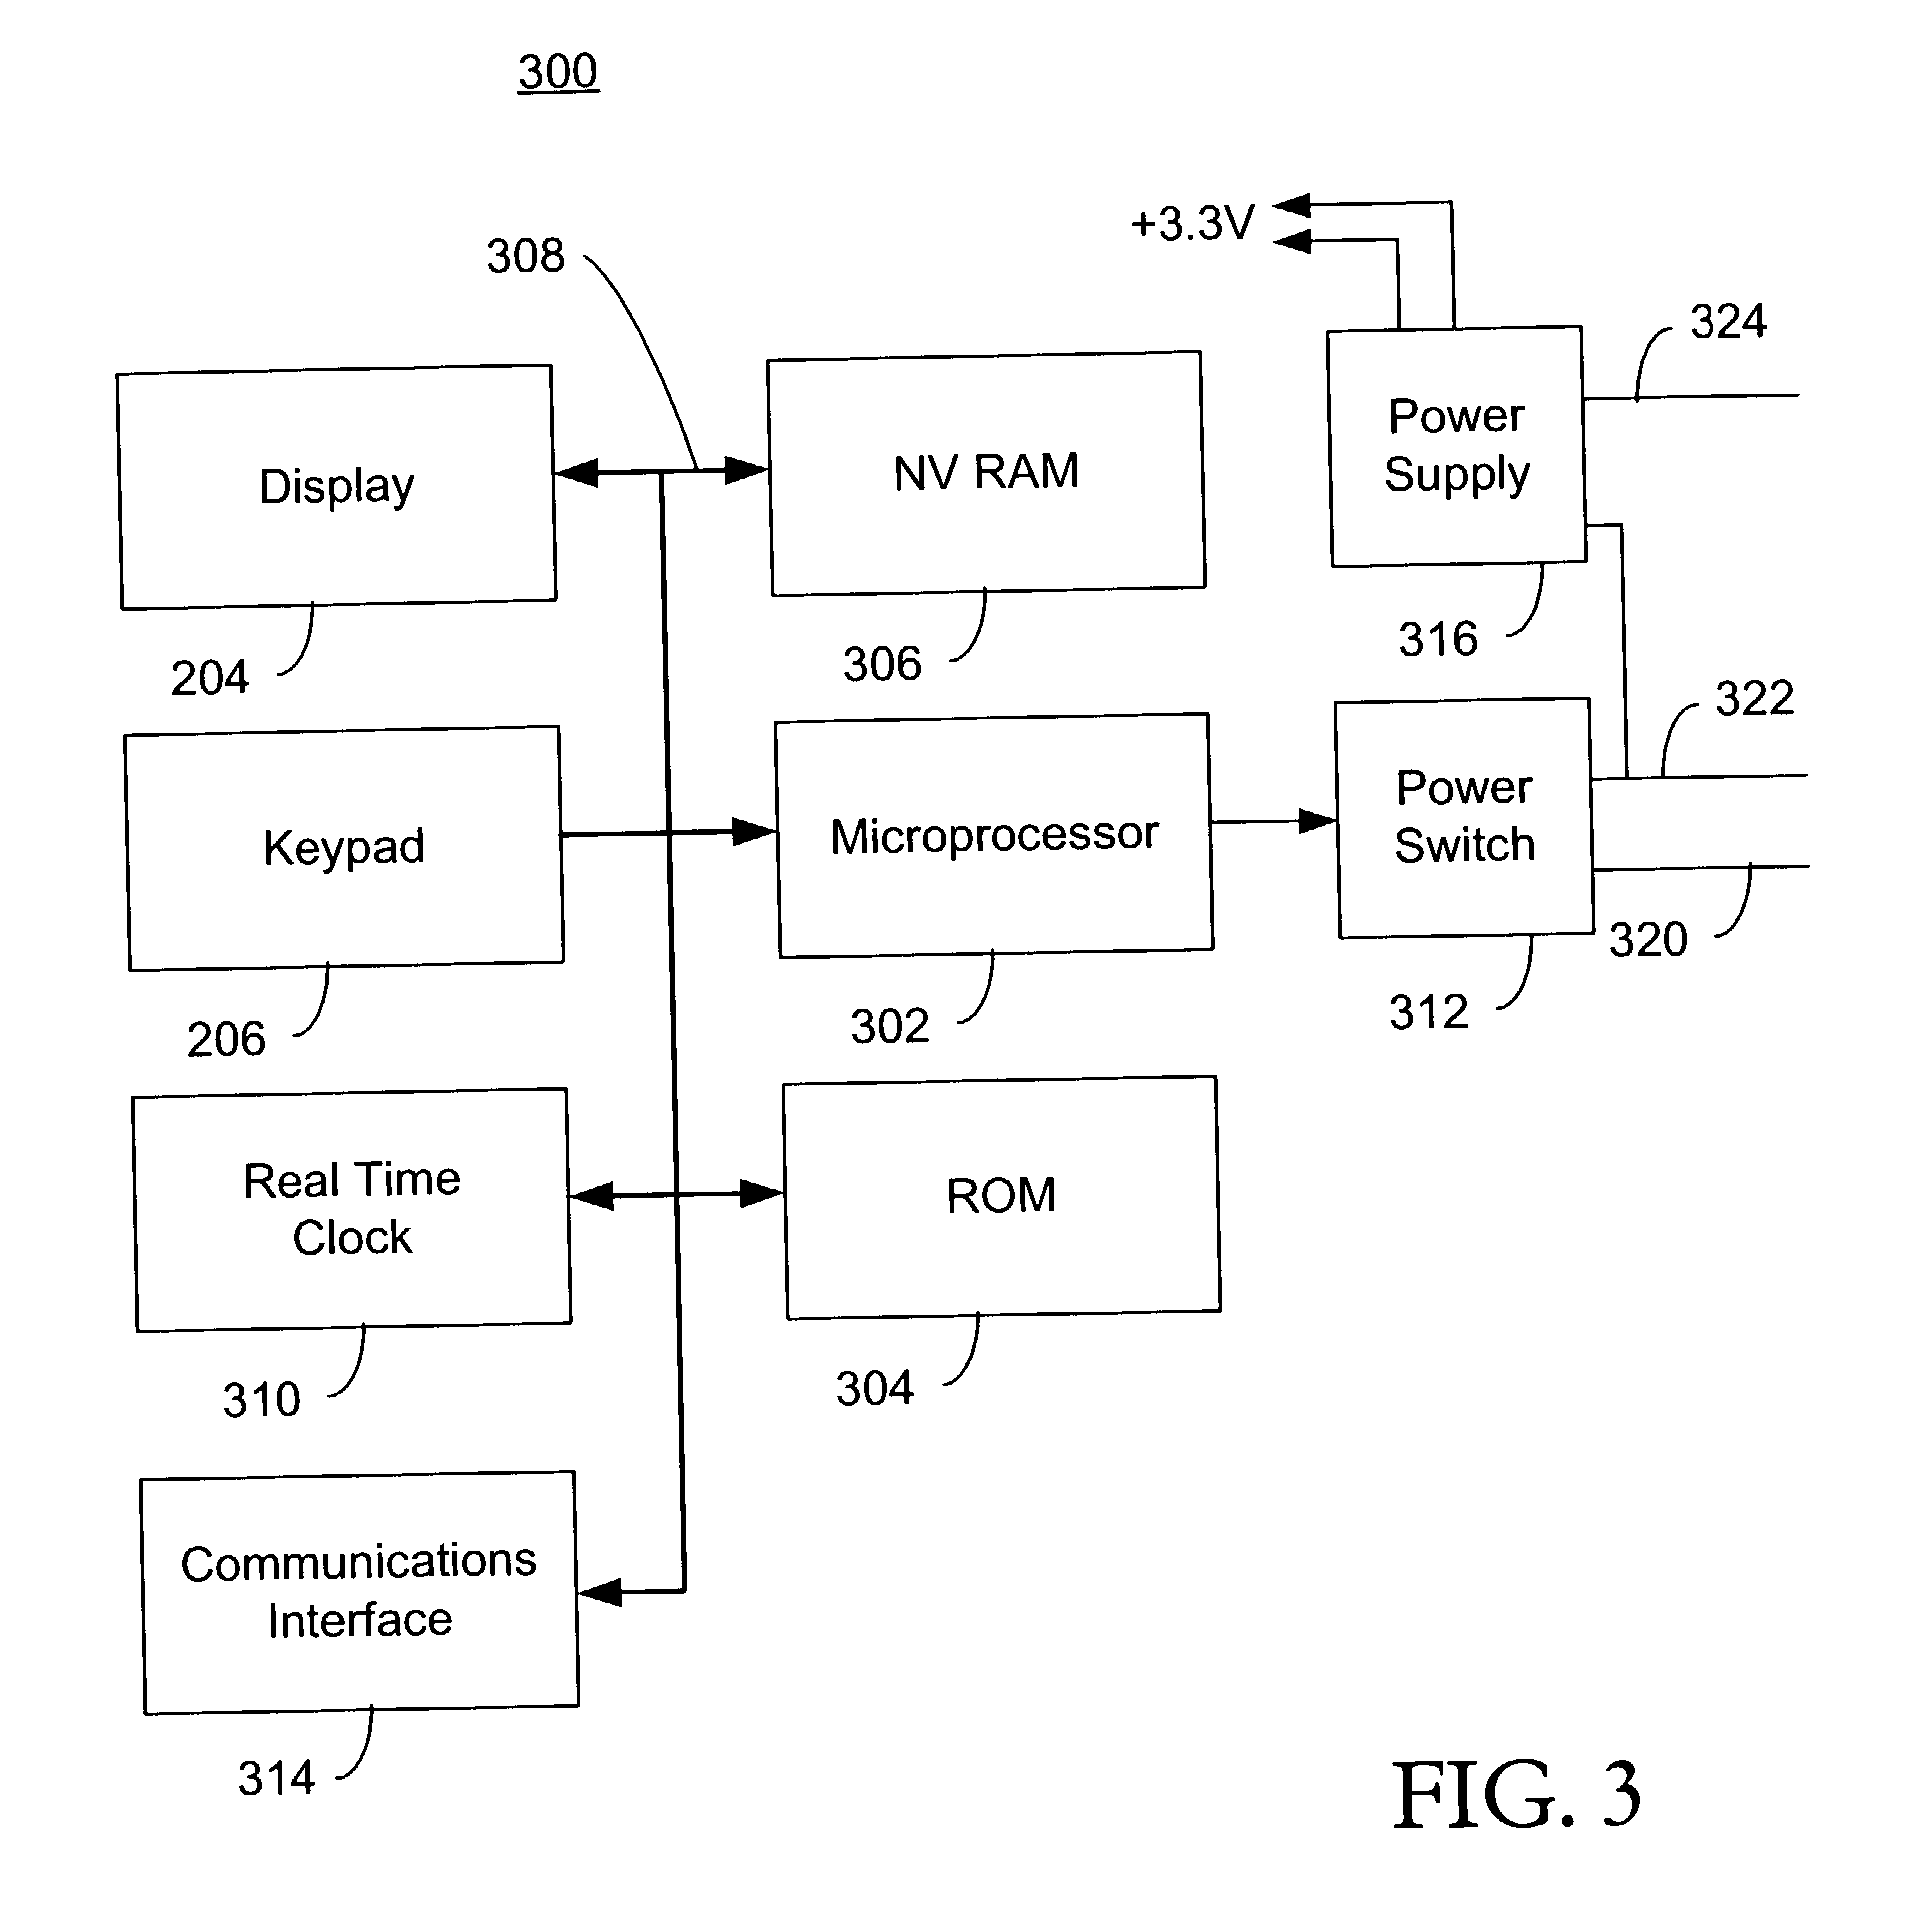 Method and system for controlling one or more apparatus based on a geographic location